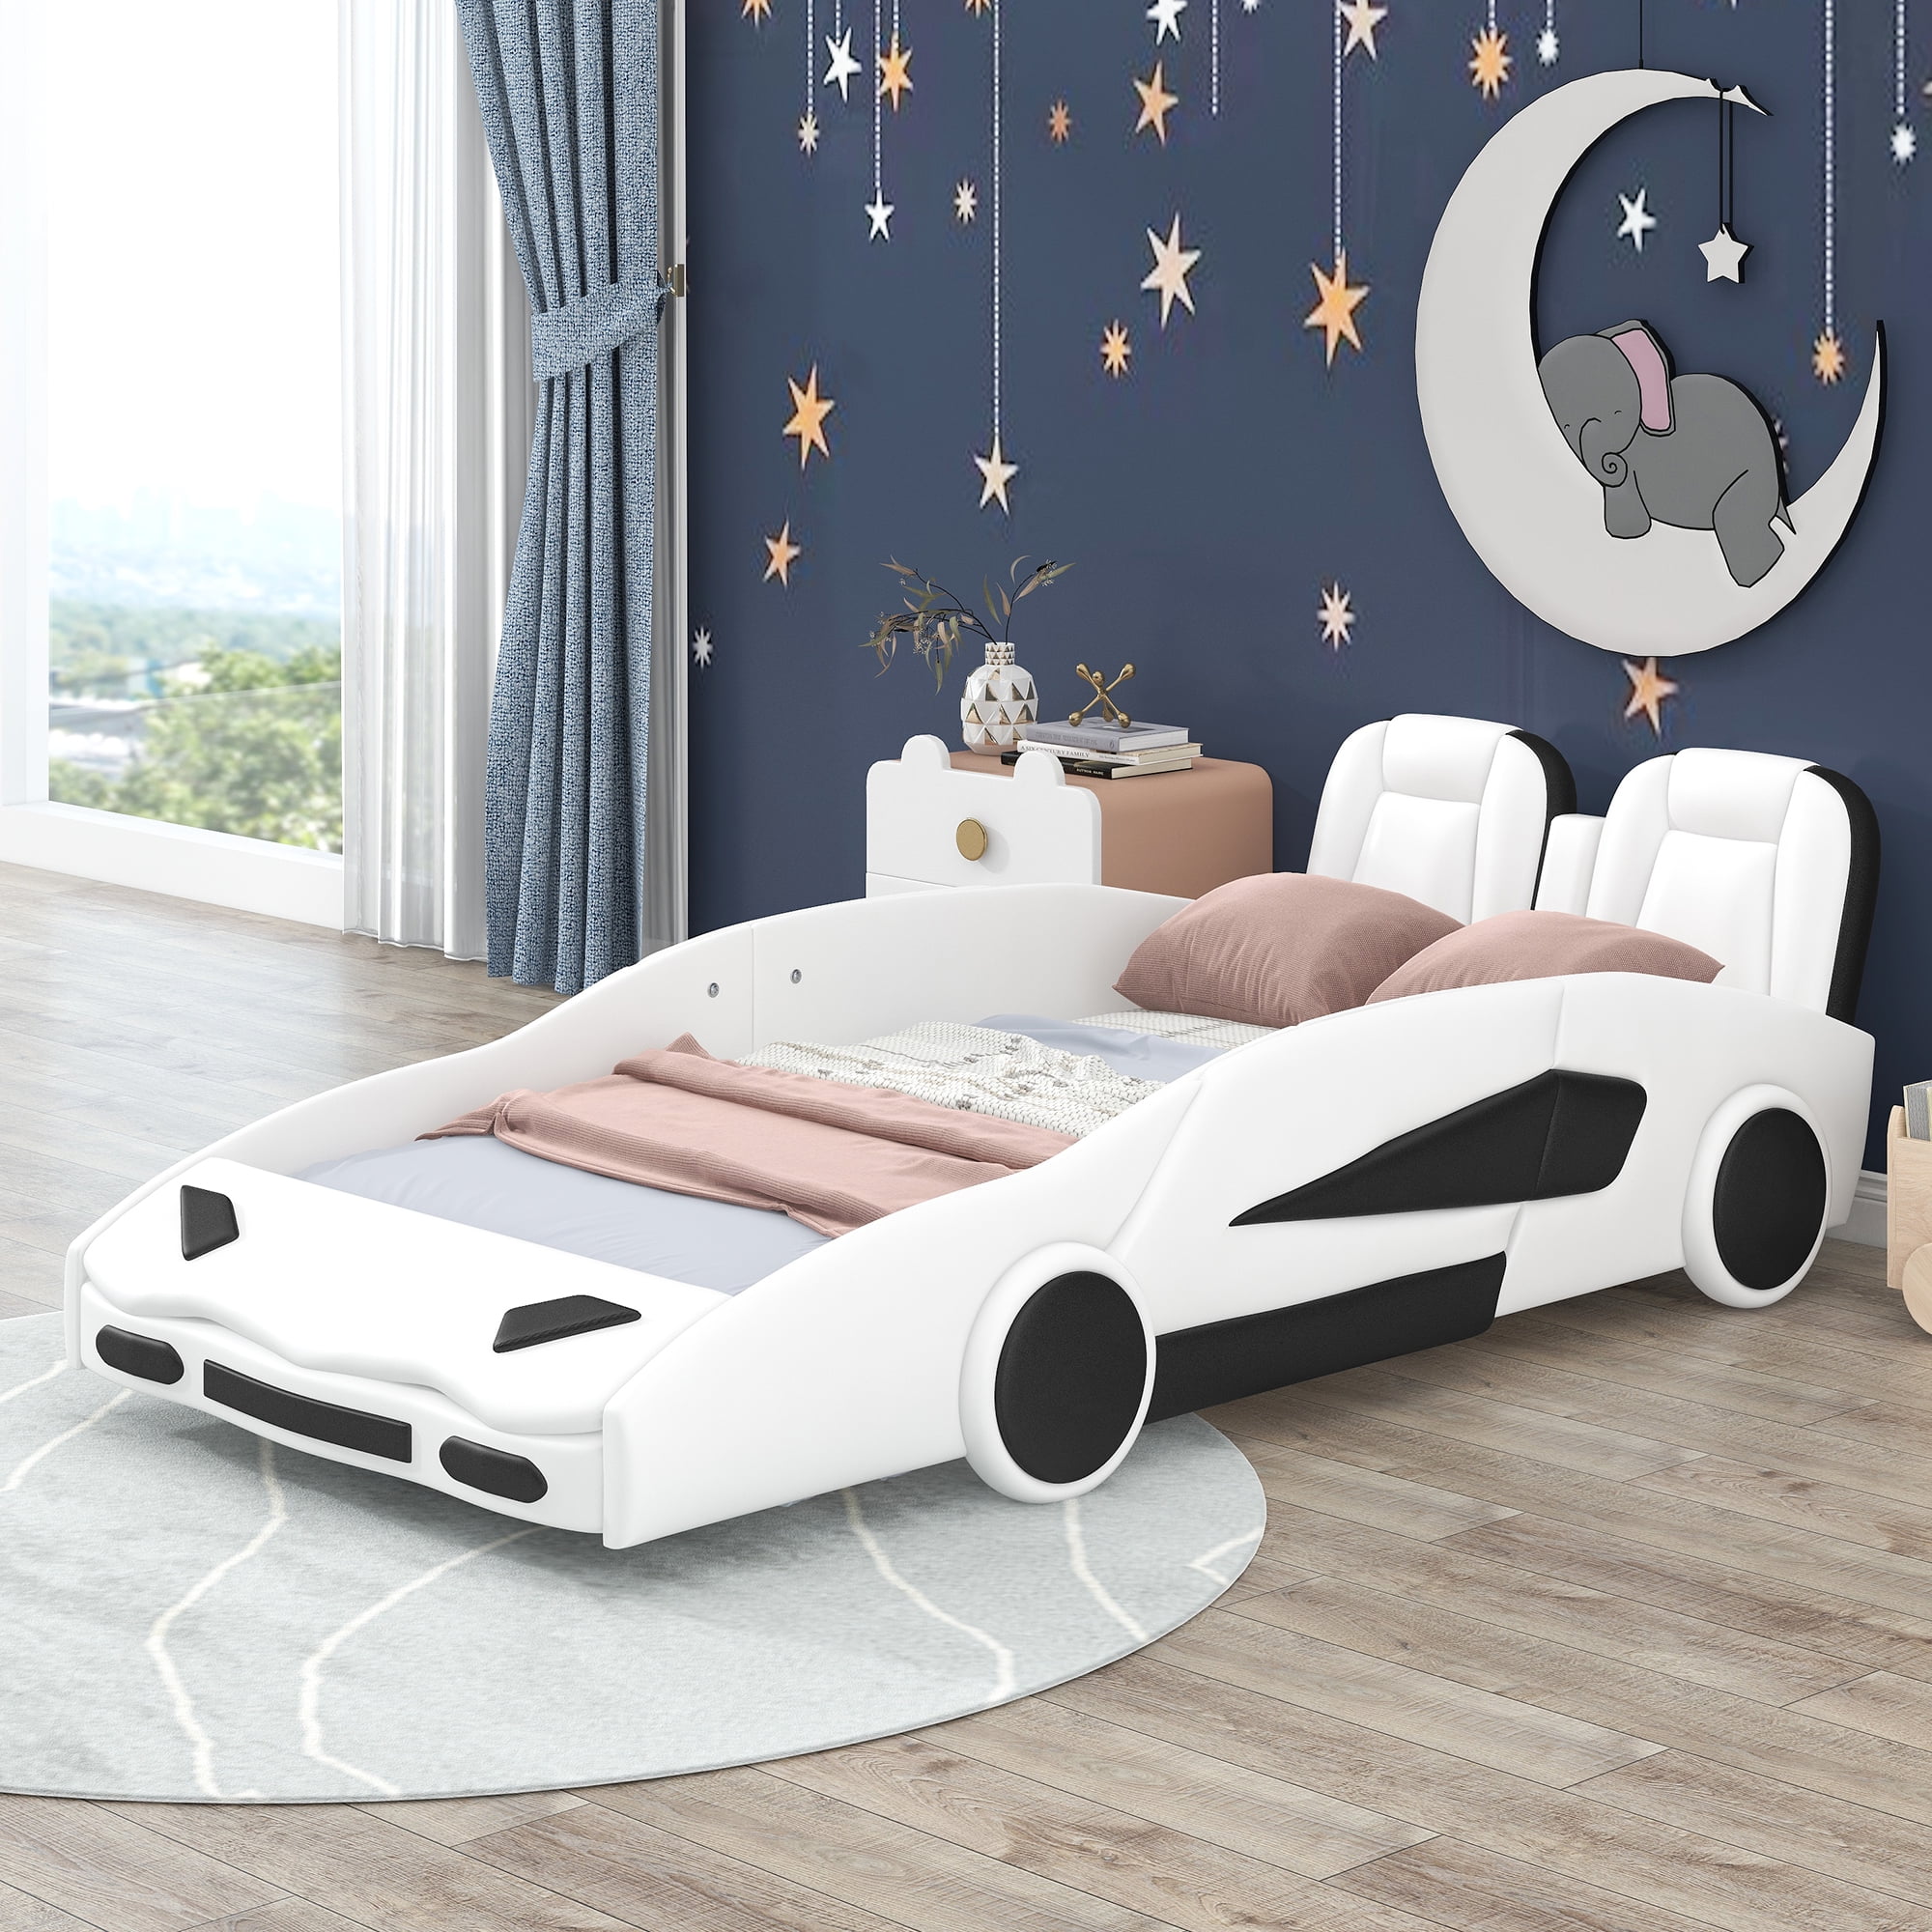 Euroco Modern Wood Race Car-Shaped Twin Platform Bed for Kids’ Bedroom,  Upholstery Car Bed for Kids Gift, White